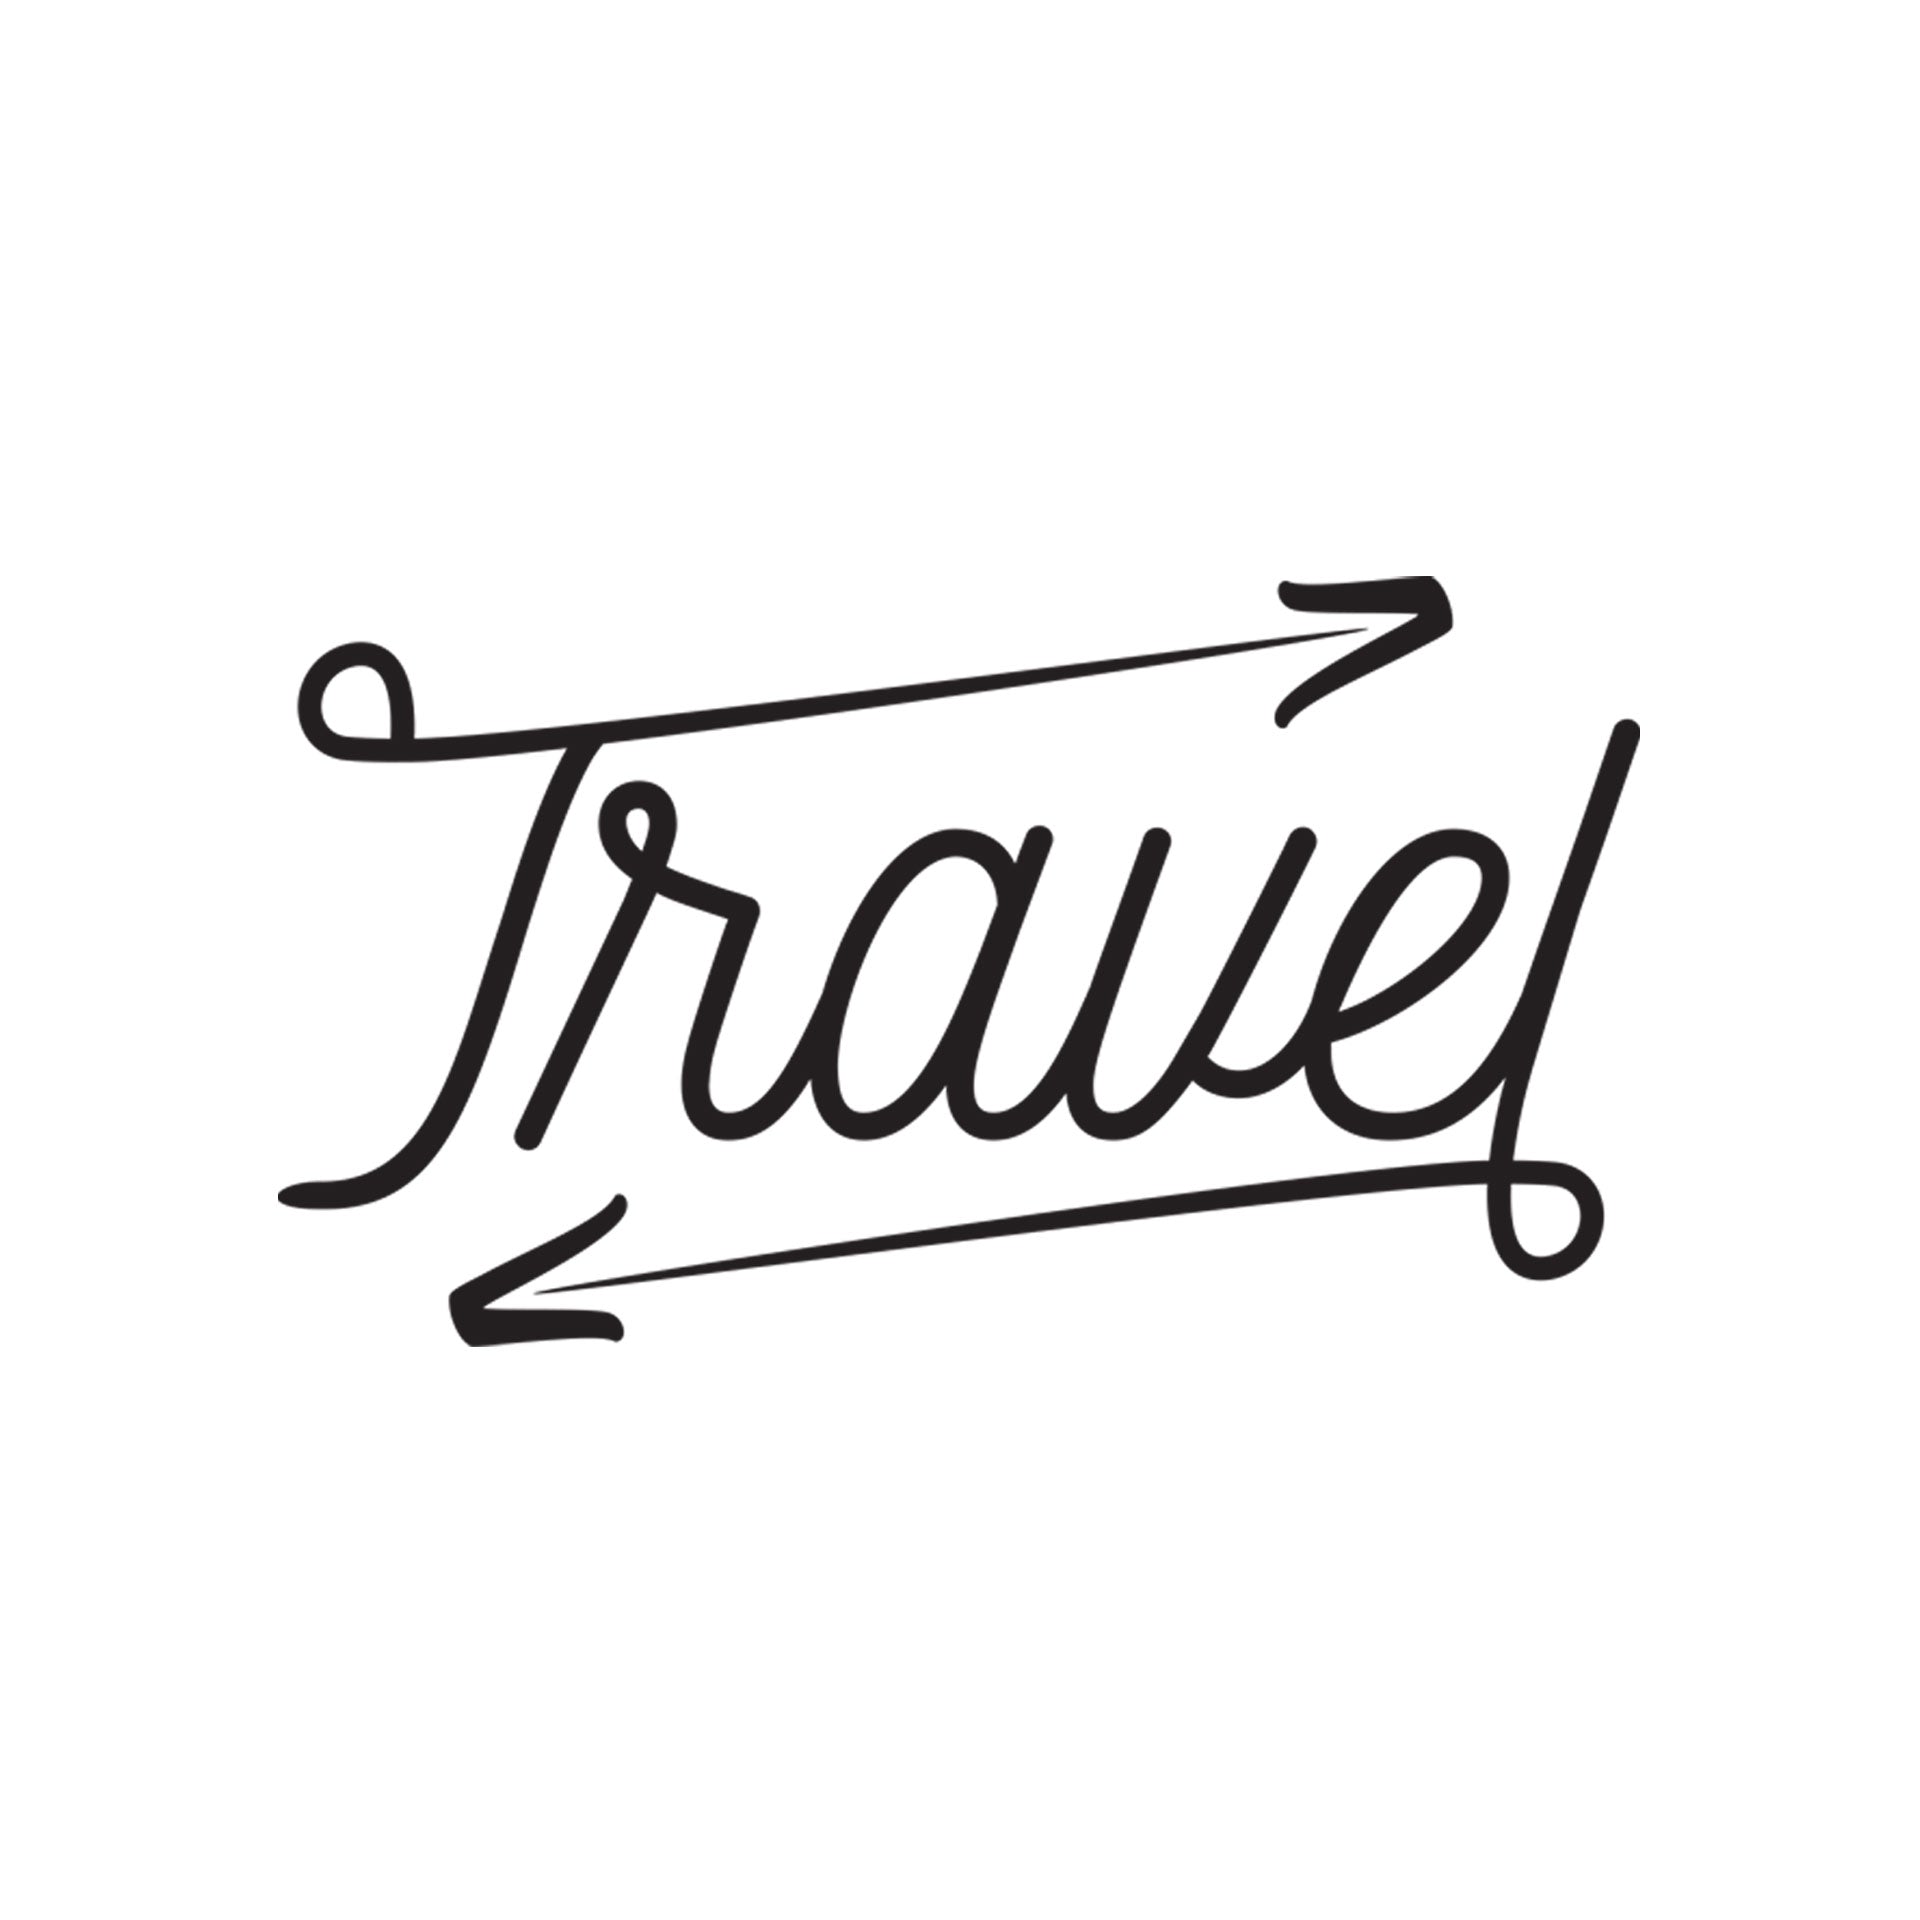 travel word images